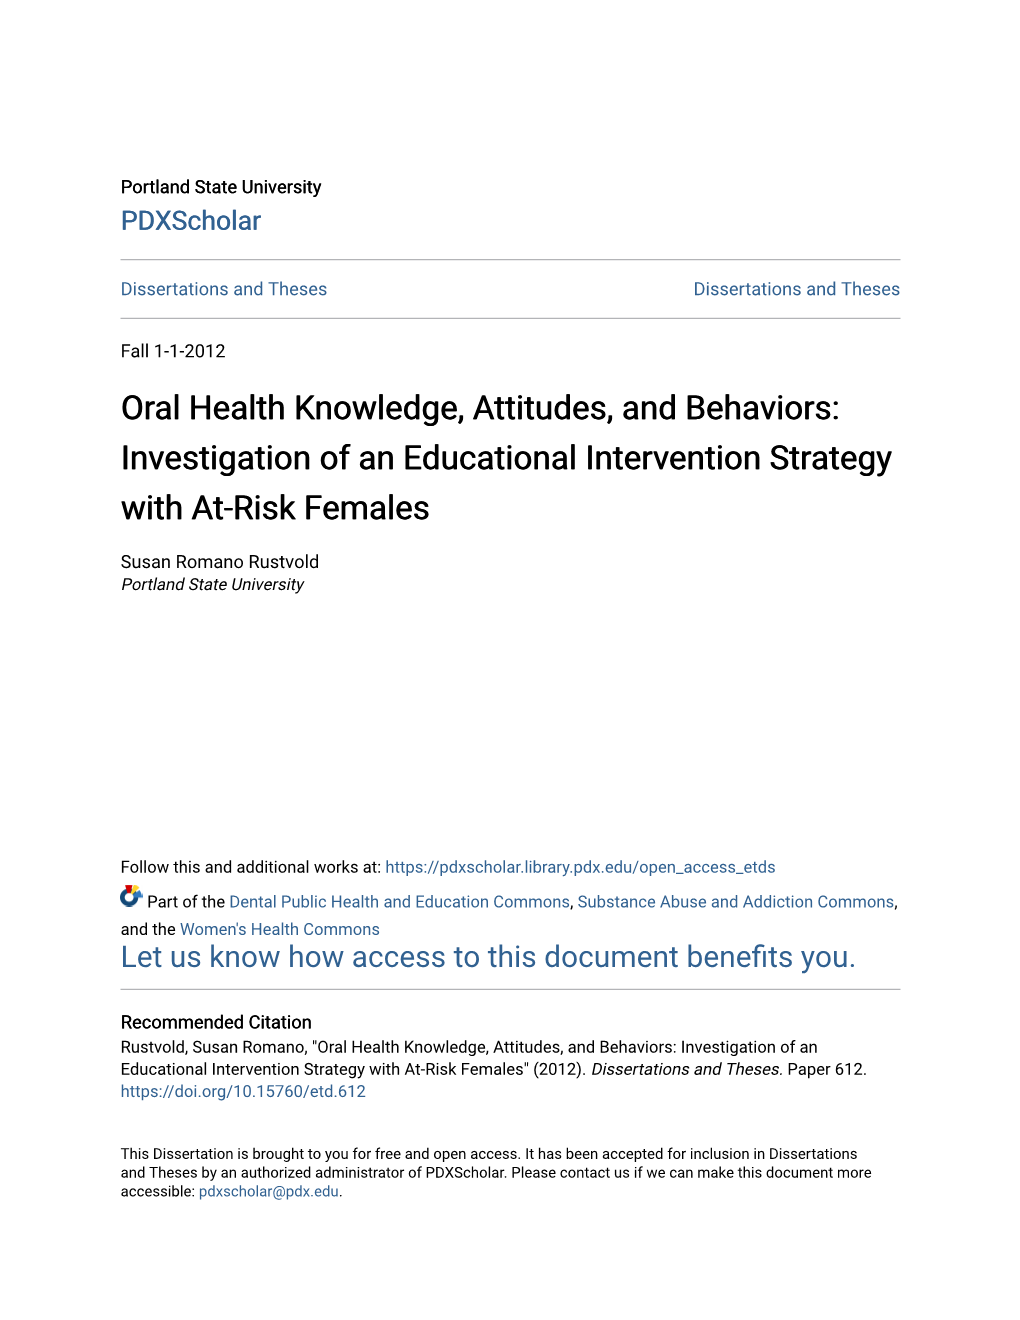 Oral Health Knowledge, Attitudes, and Behaviors: Investigation of an Educational Intervention Strategy with At-Risk Females